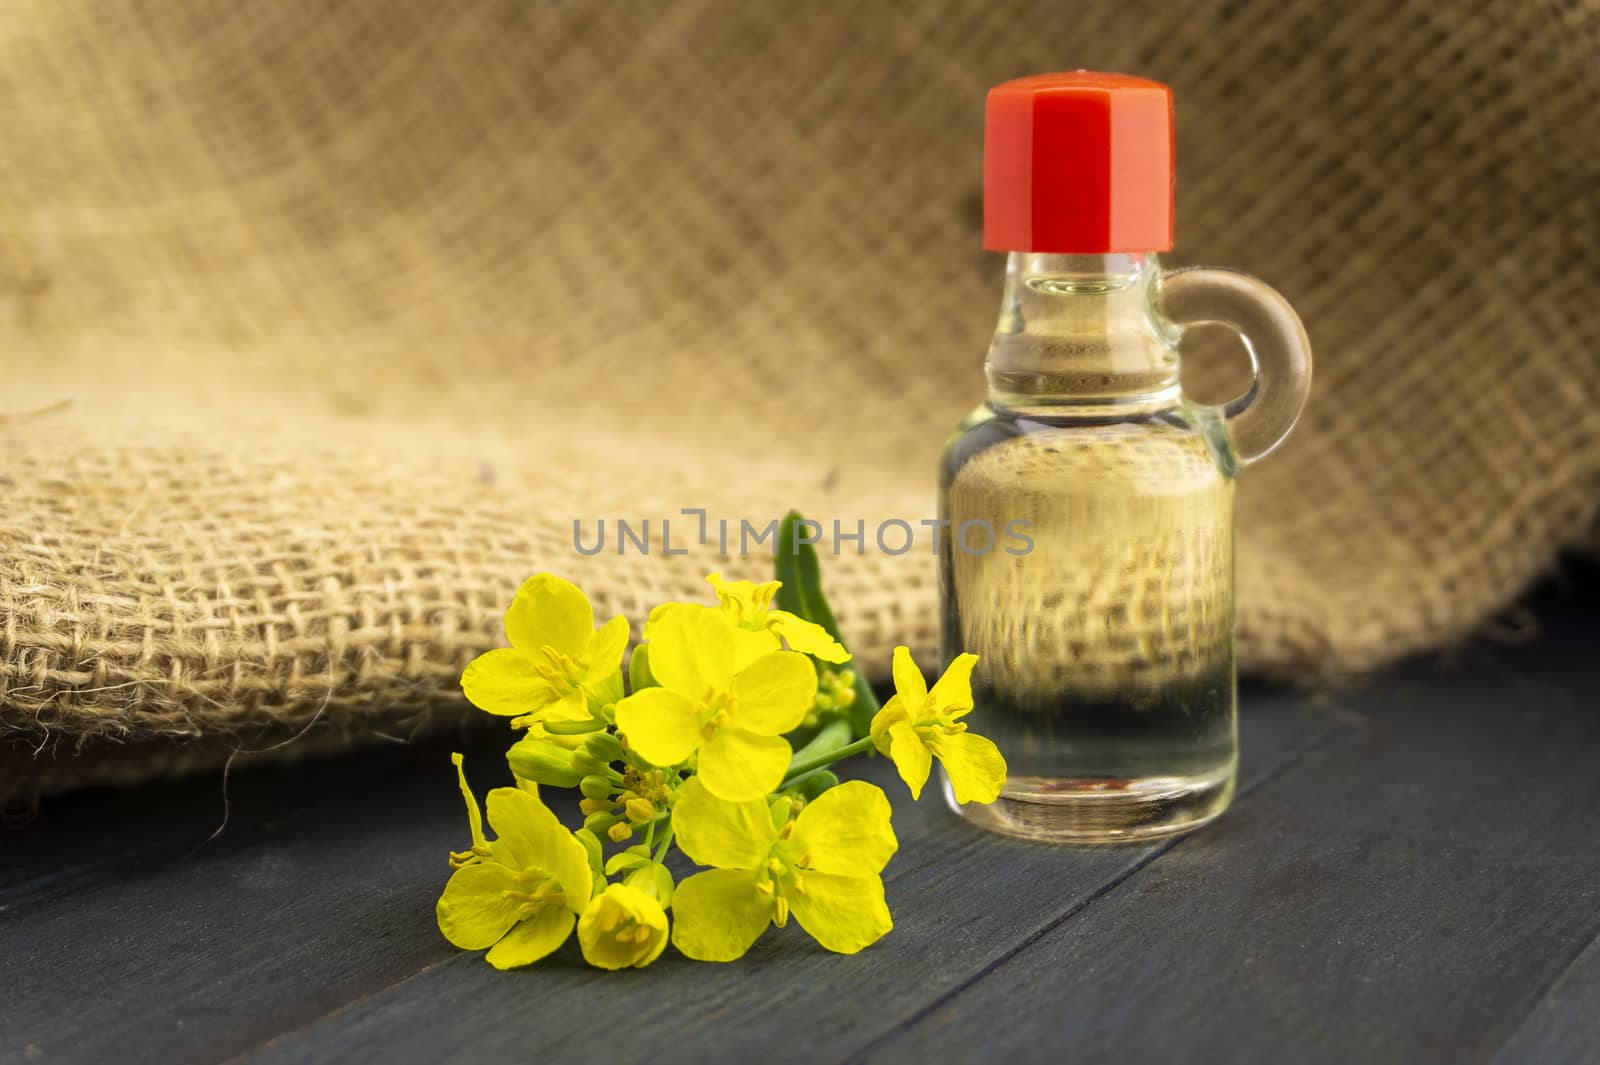 Small sprig of vivid yellow rapeseed flowers with decanter of oil alongside hessian sack fabric with copy space